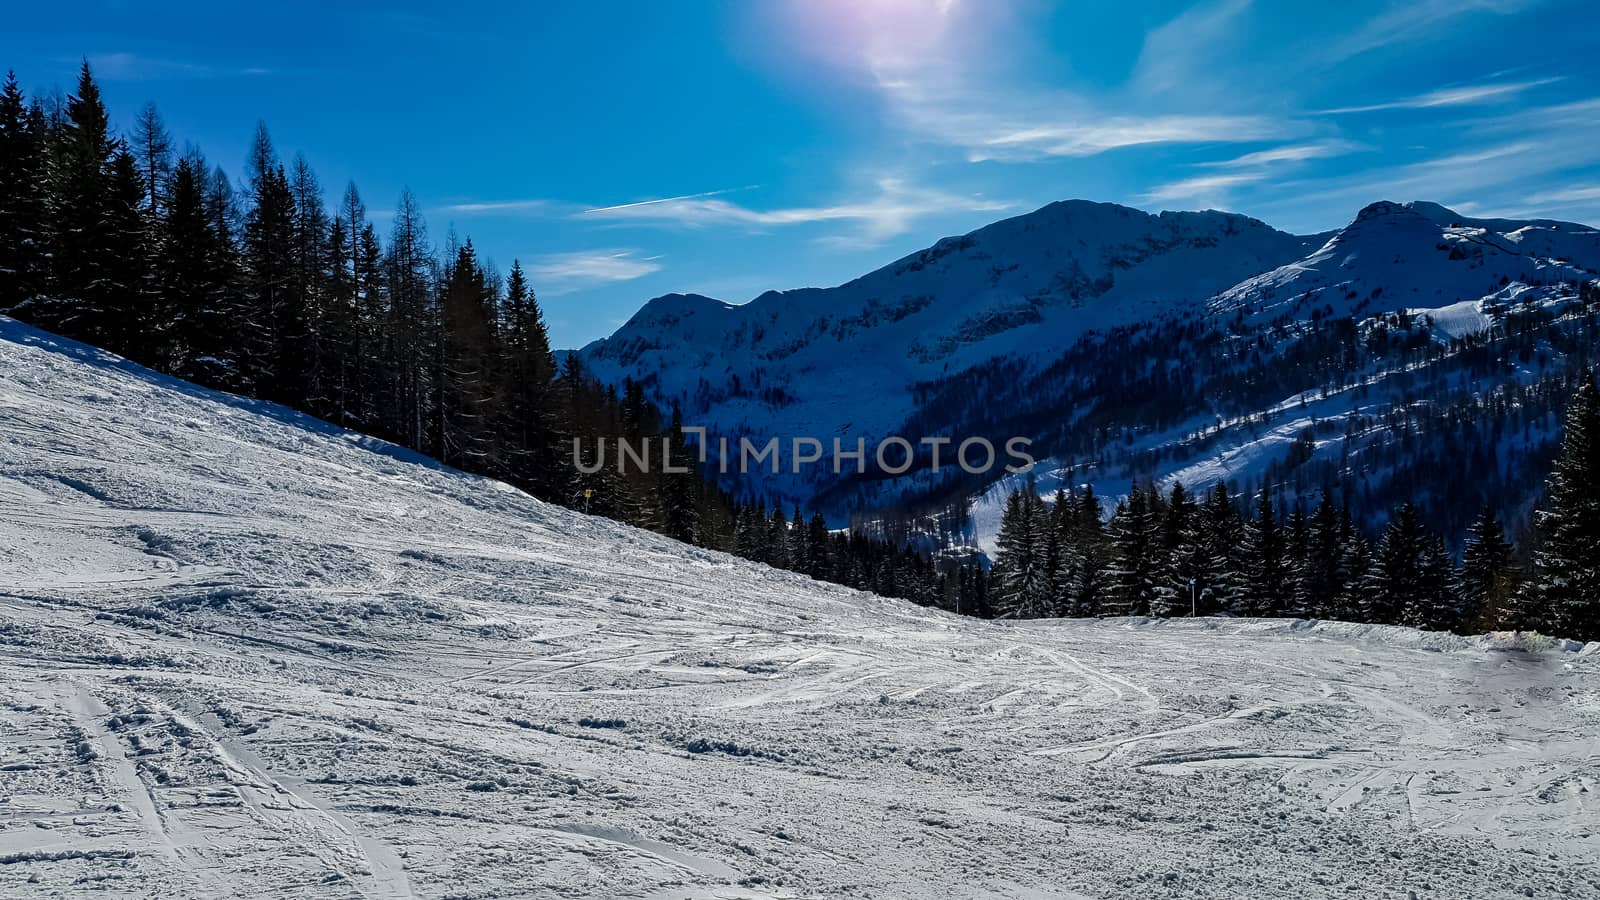 Snowy Alps in Austria During Winter Against A Blue Sky